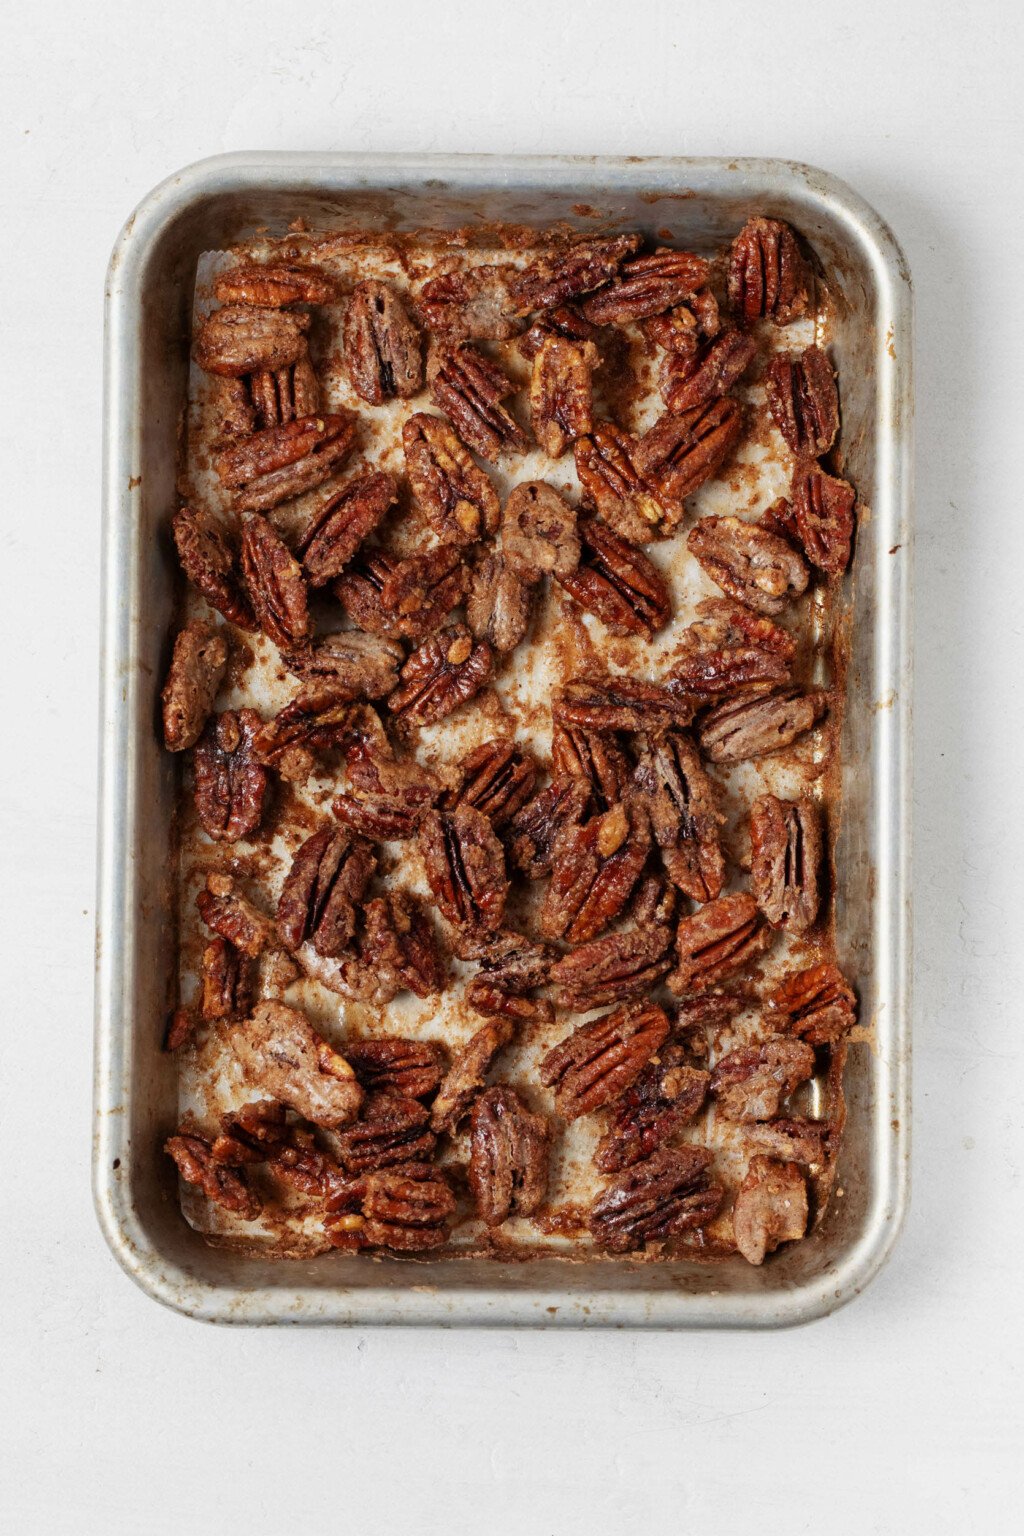 Crispy, baked pecan halves are resting on a baking sheet, fresh out of the oven.